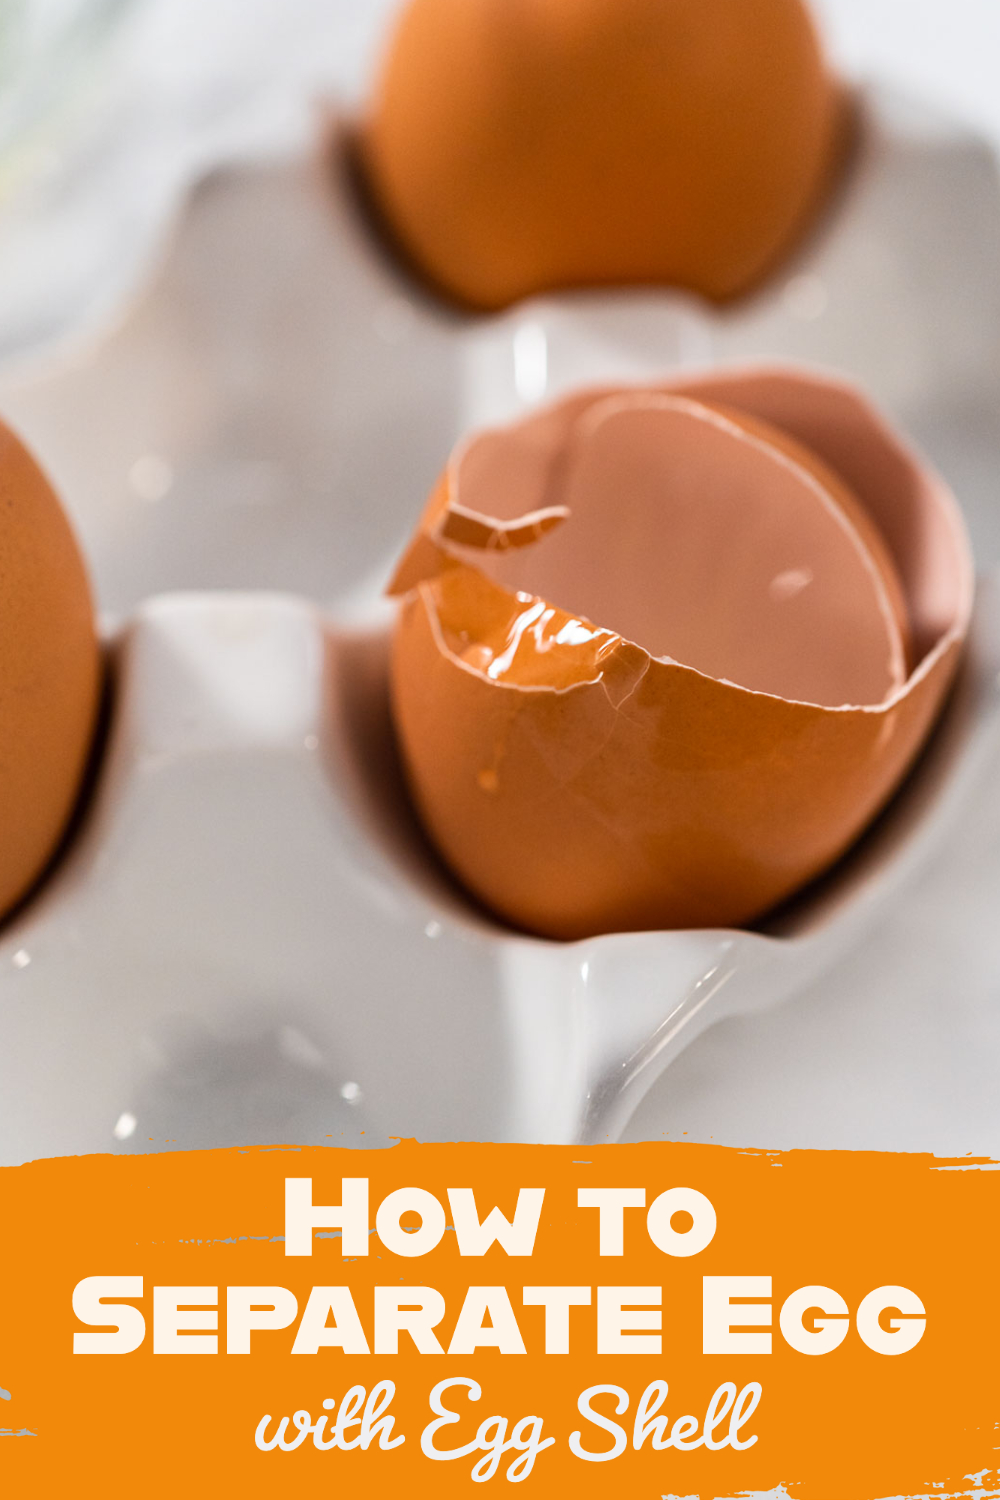 How to Separate Egg with Egg Shell